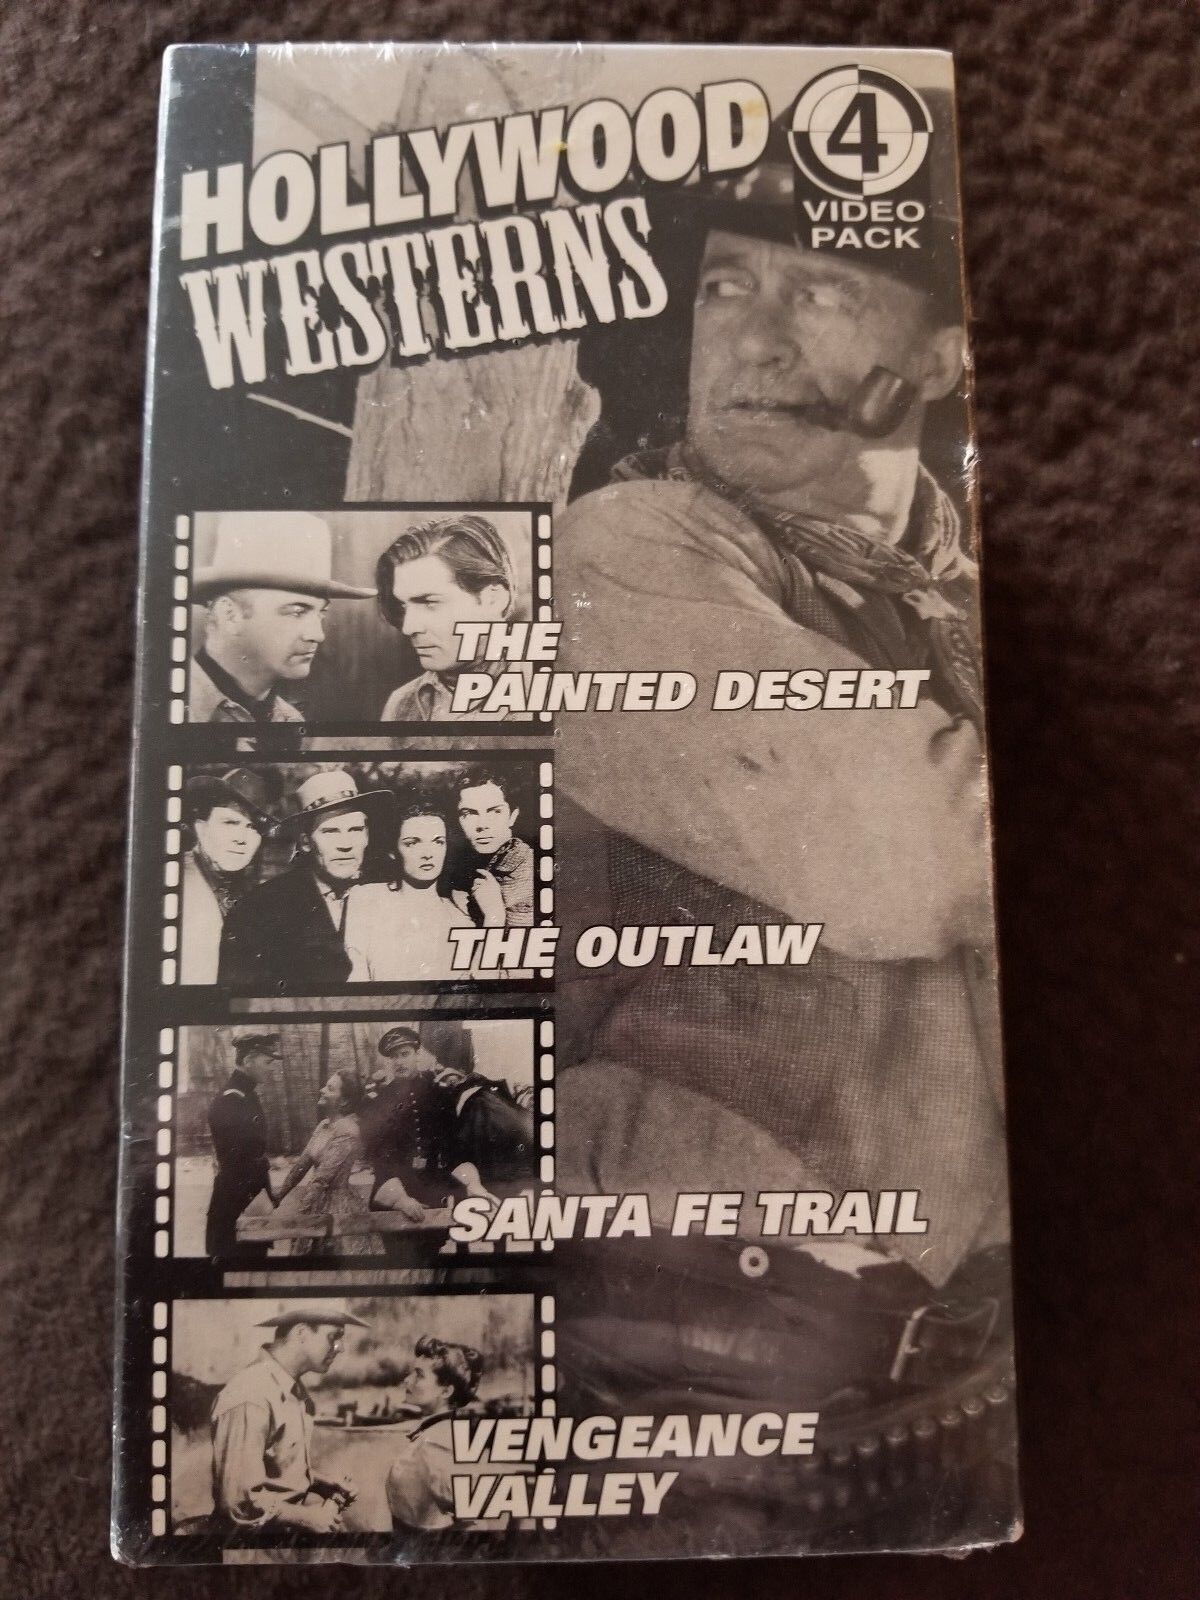 Hollywood Westerns 4 VHS Movie Western Pack Black and White VHS Set